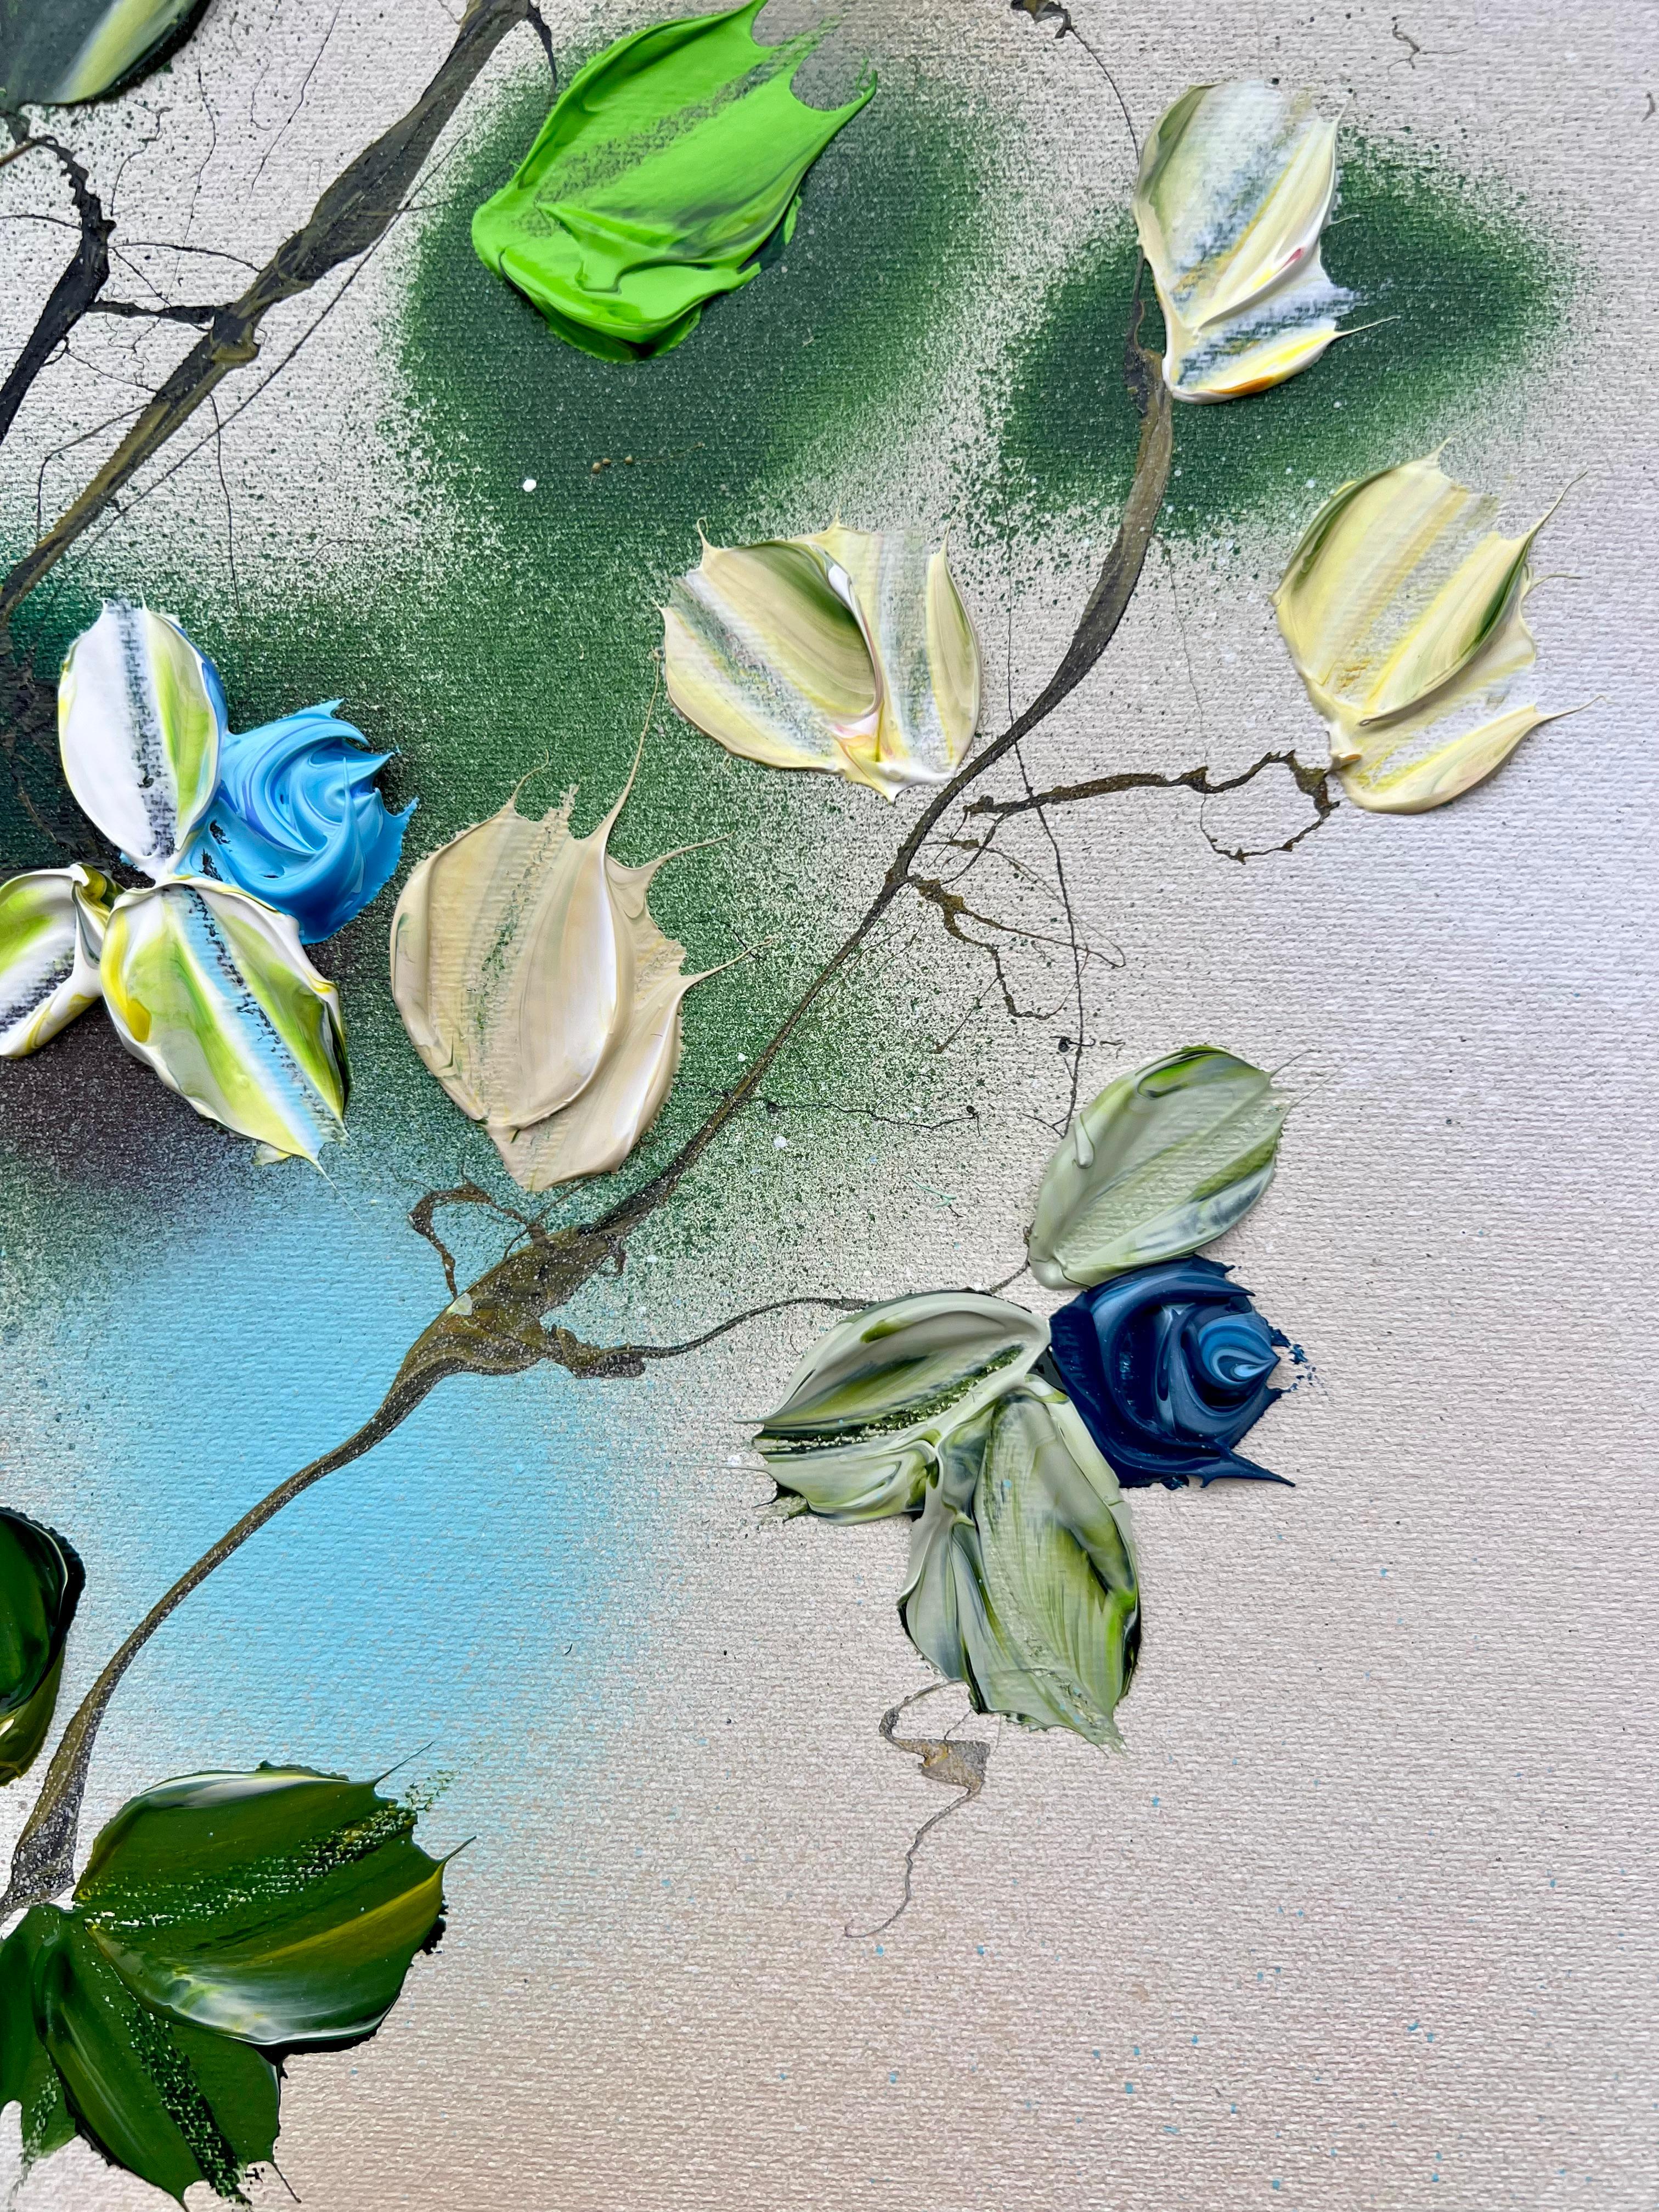 Abstract textured acrylic painting on canvas, measuring 100x120x4 cm (39.4 x 47.2 x 1.6 inches), titled 'Blue Rose Stroll.' This Mixed Media artwork on gallery-wrapped canvas is ready to grace your space without the need for framing. The sides are